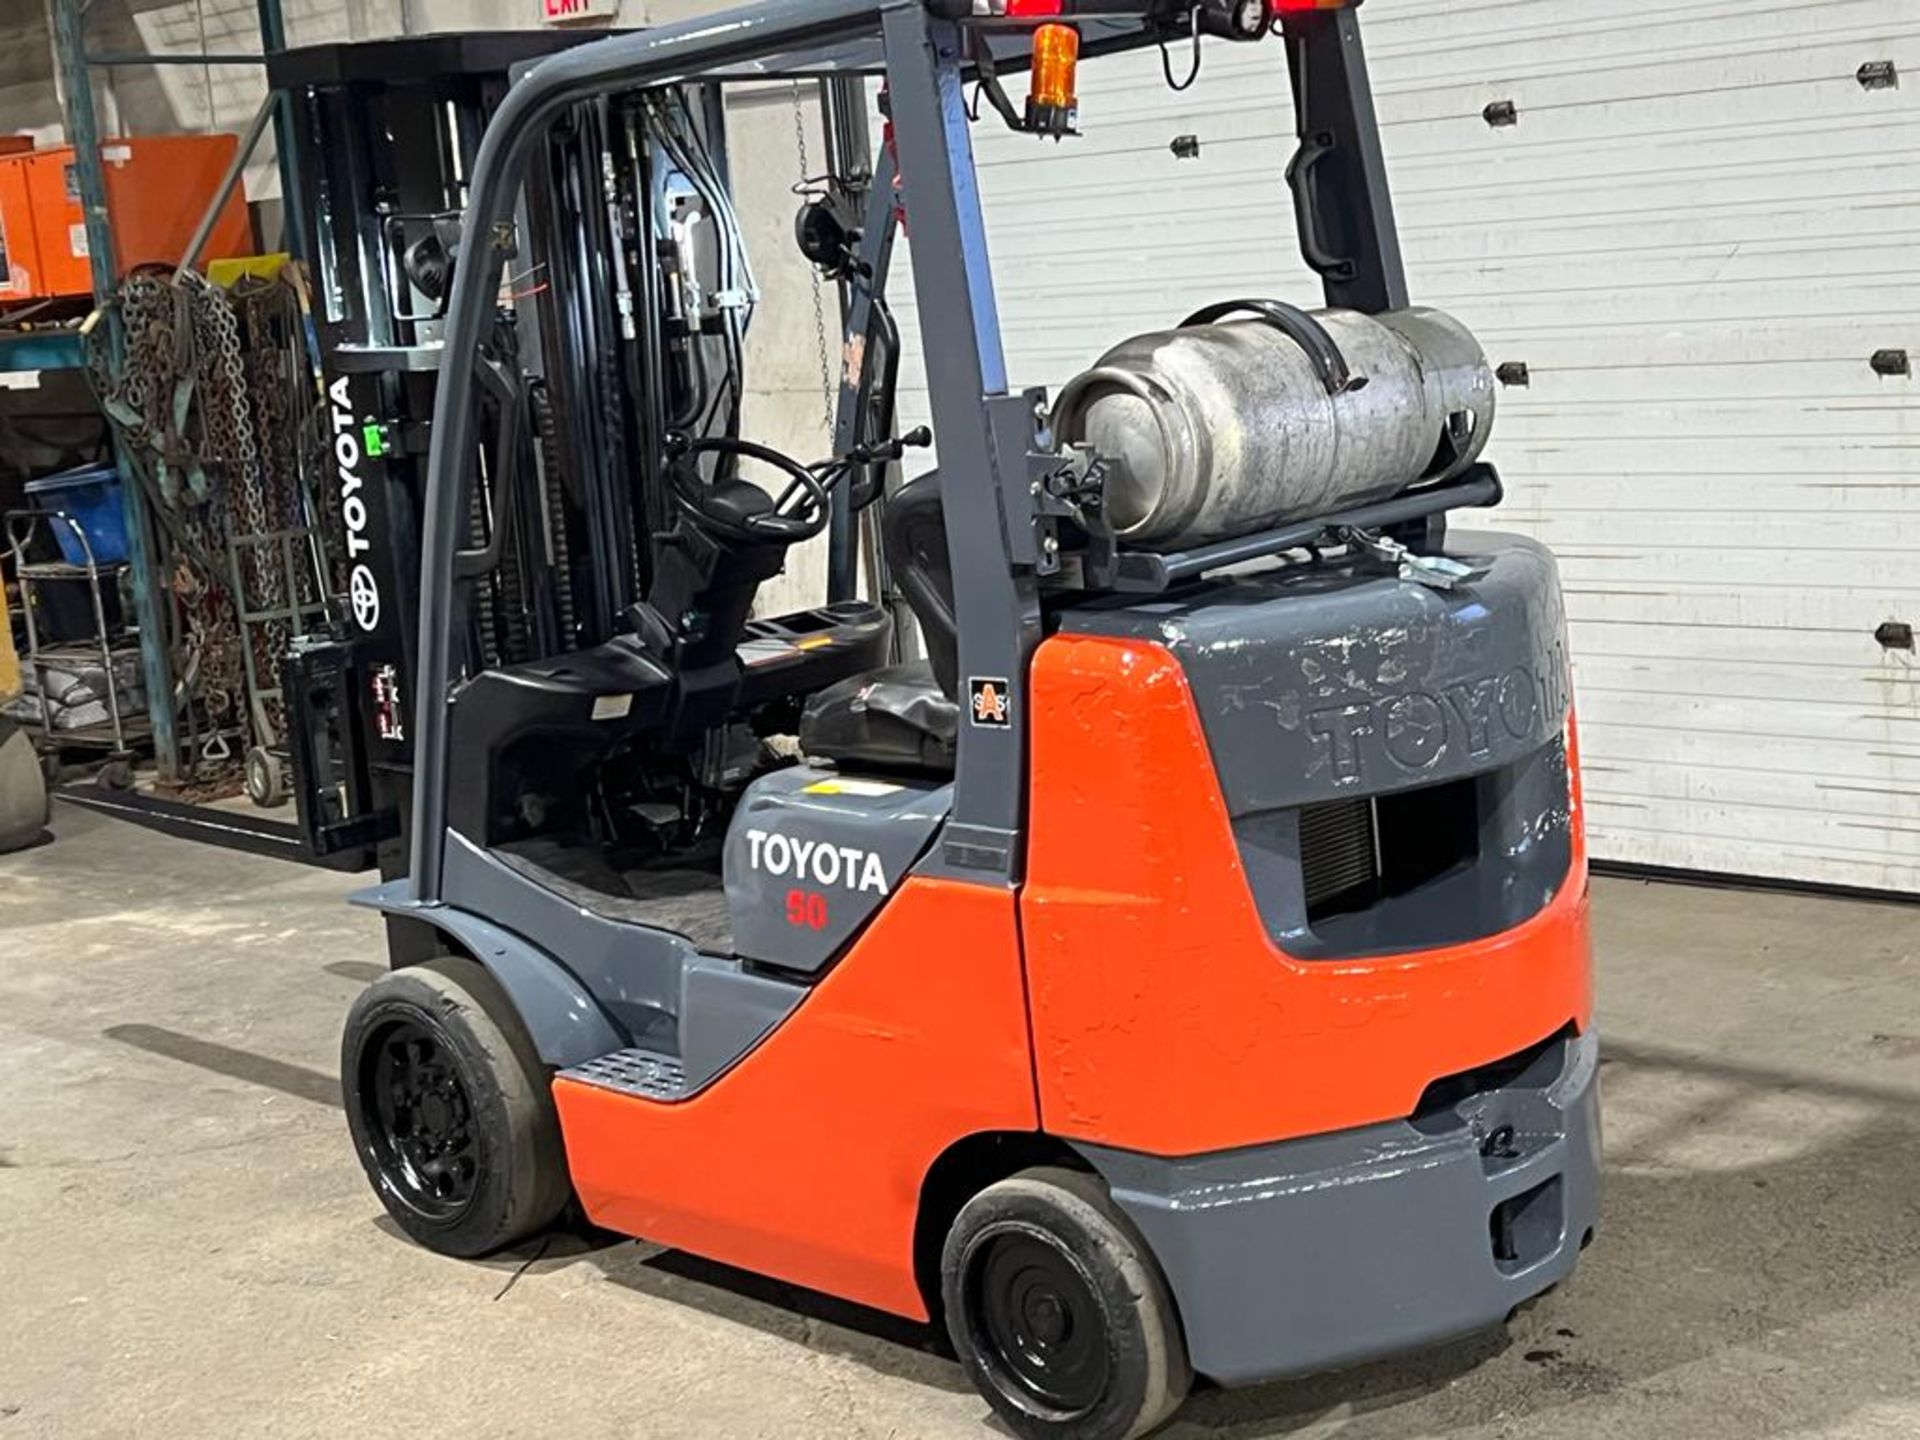 2014 Toyota 5,000lbs Capacity Forklift LPG (propane) battery with Sideshift and 3-stage Mast (no - Image 5 of 5